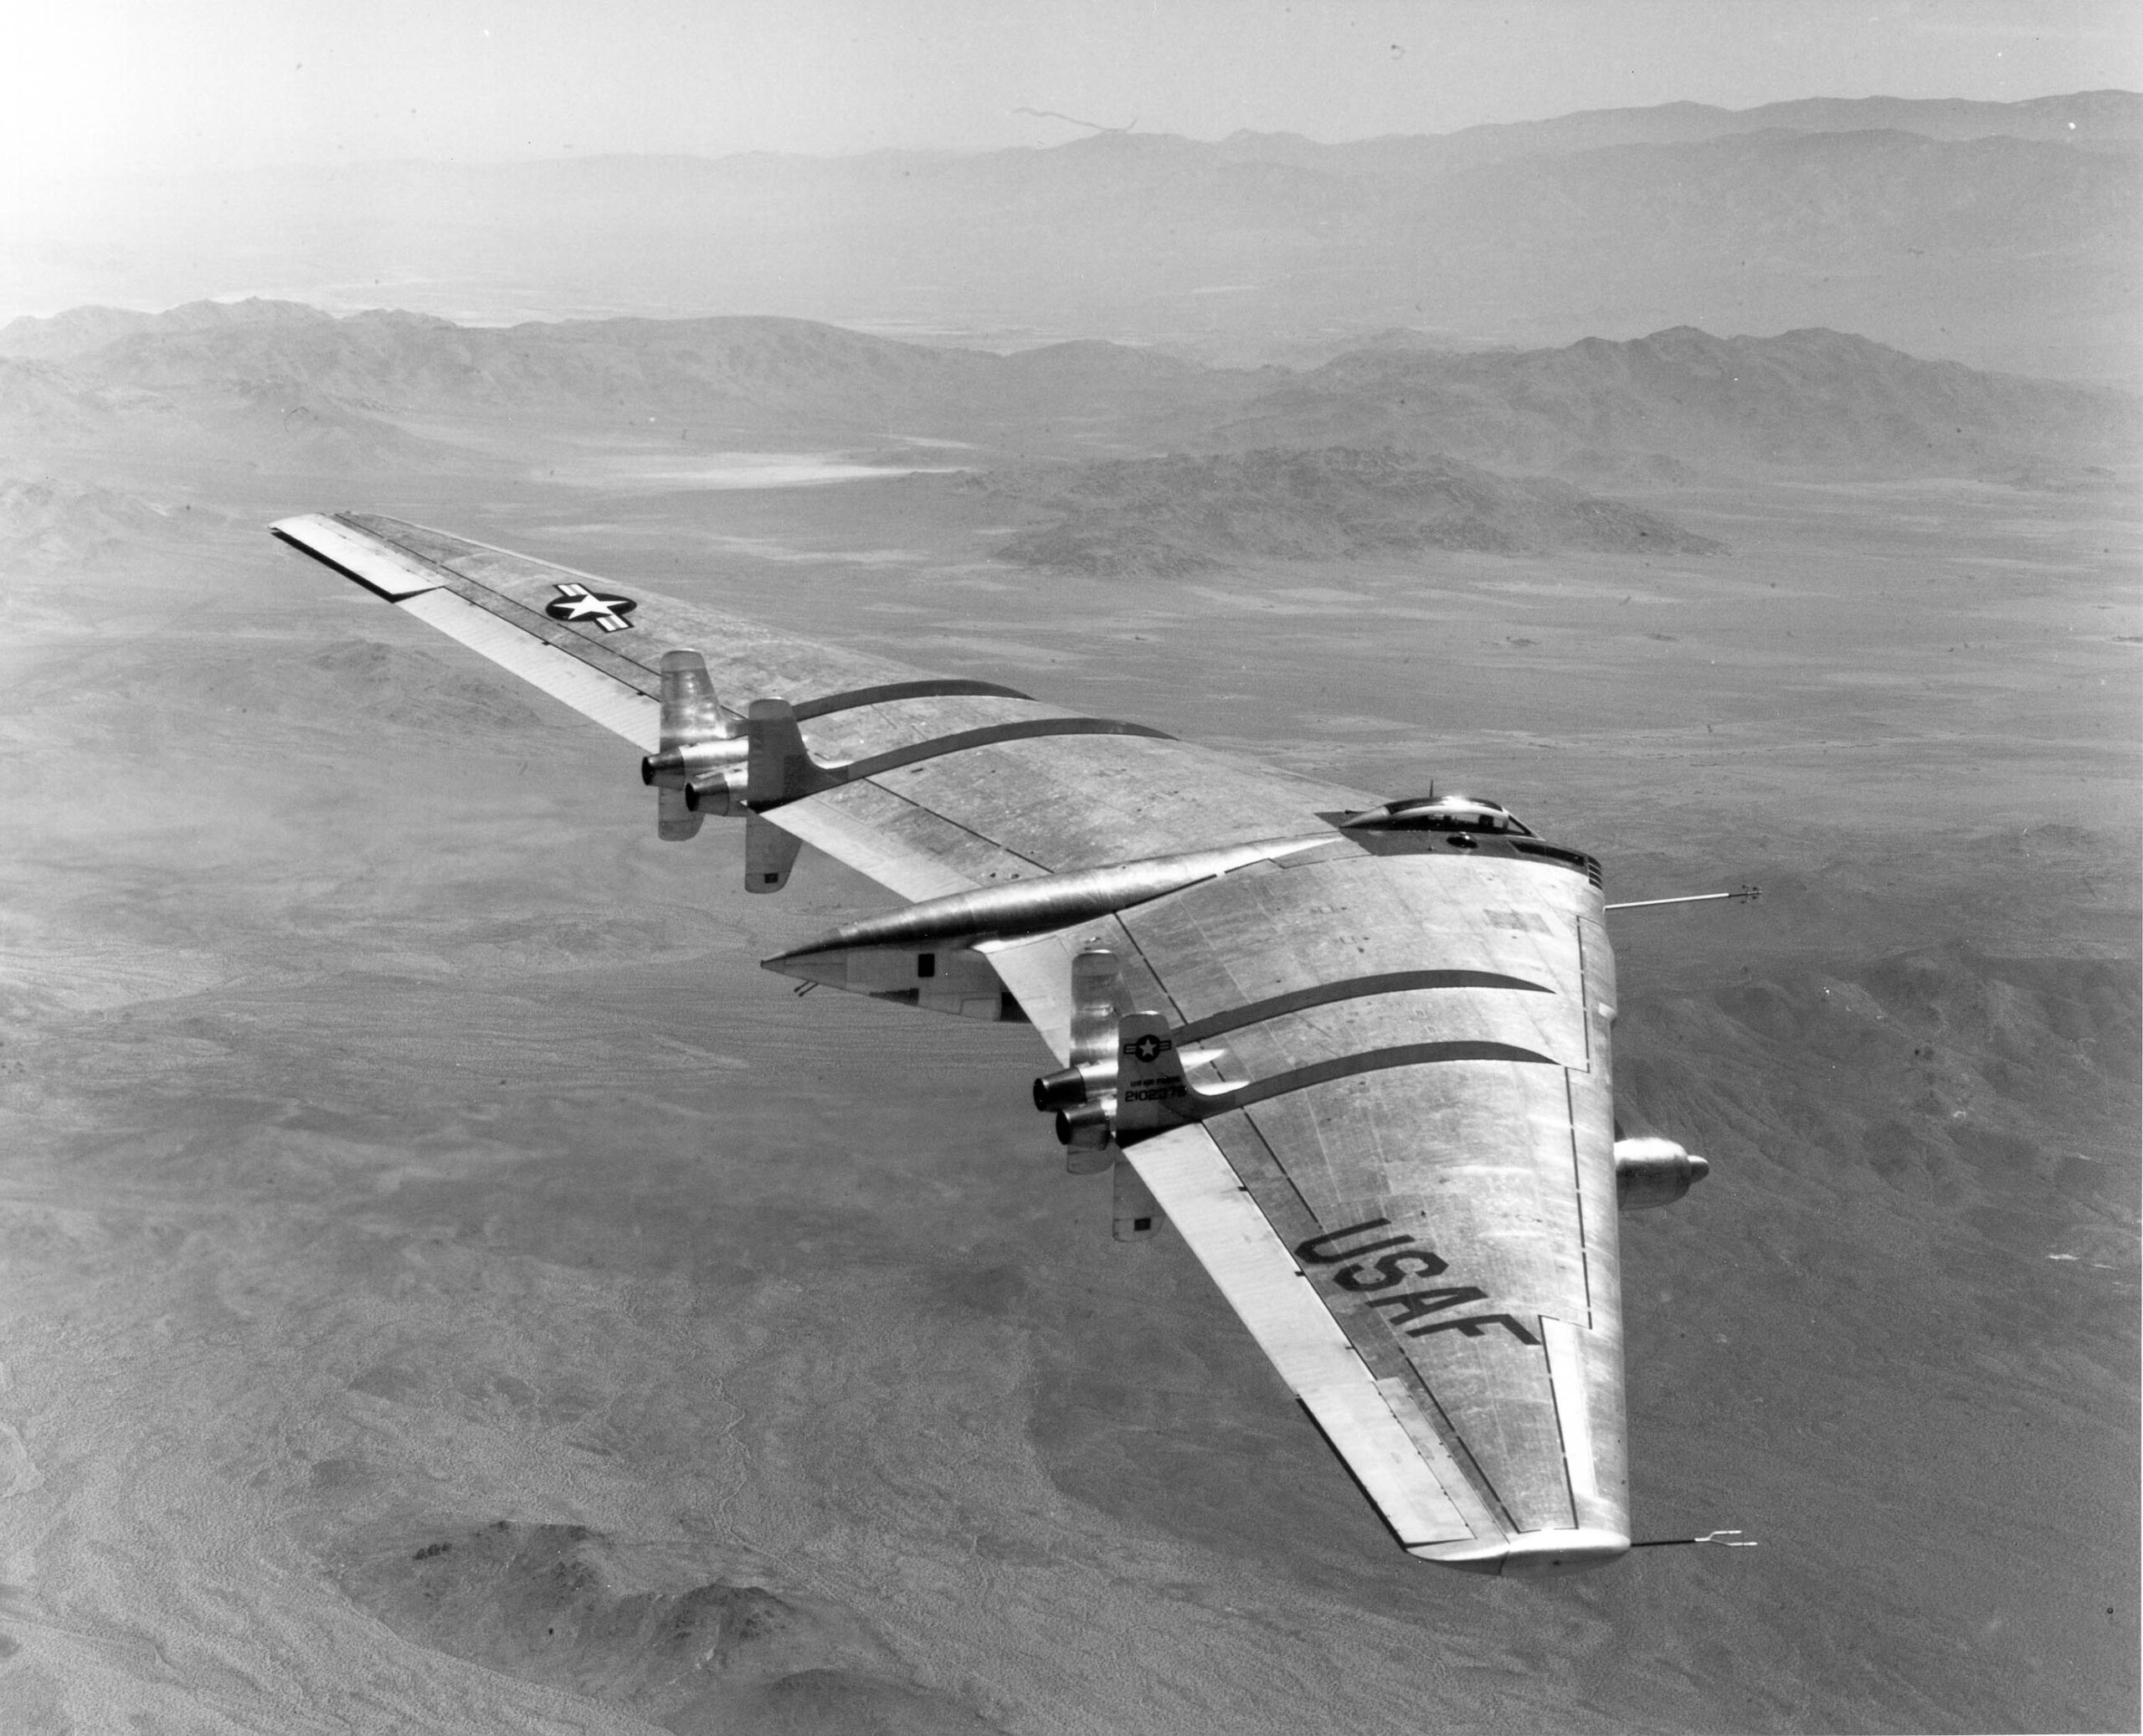 Northrop YRB-49 Flying wing, a heavy bomber prototype. This was the sixth and last of the original flying wings flown by Northrop. Note the two jet engines on under-wing pods (one is visible here just forward of the leading edge)